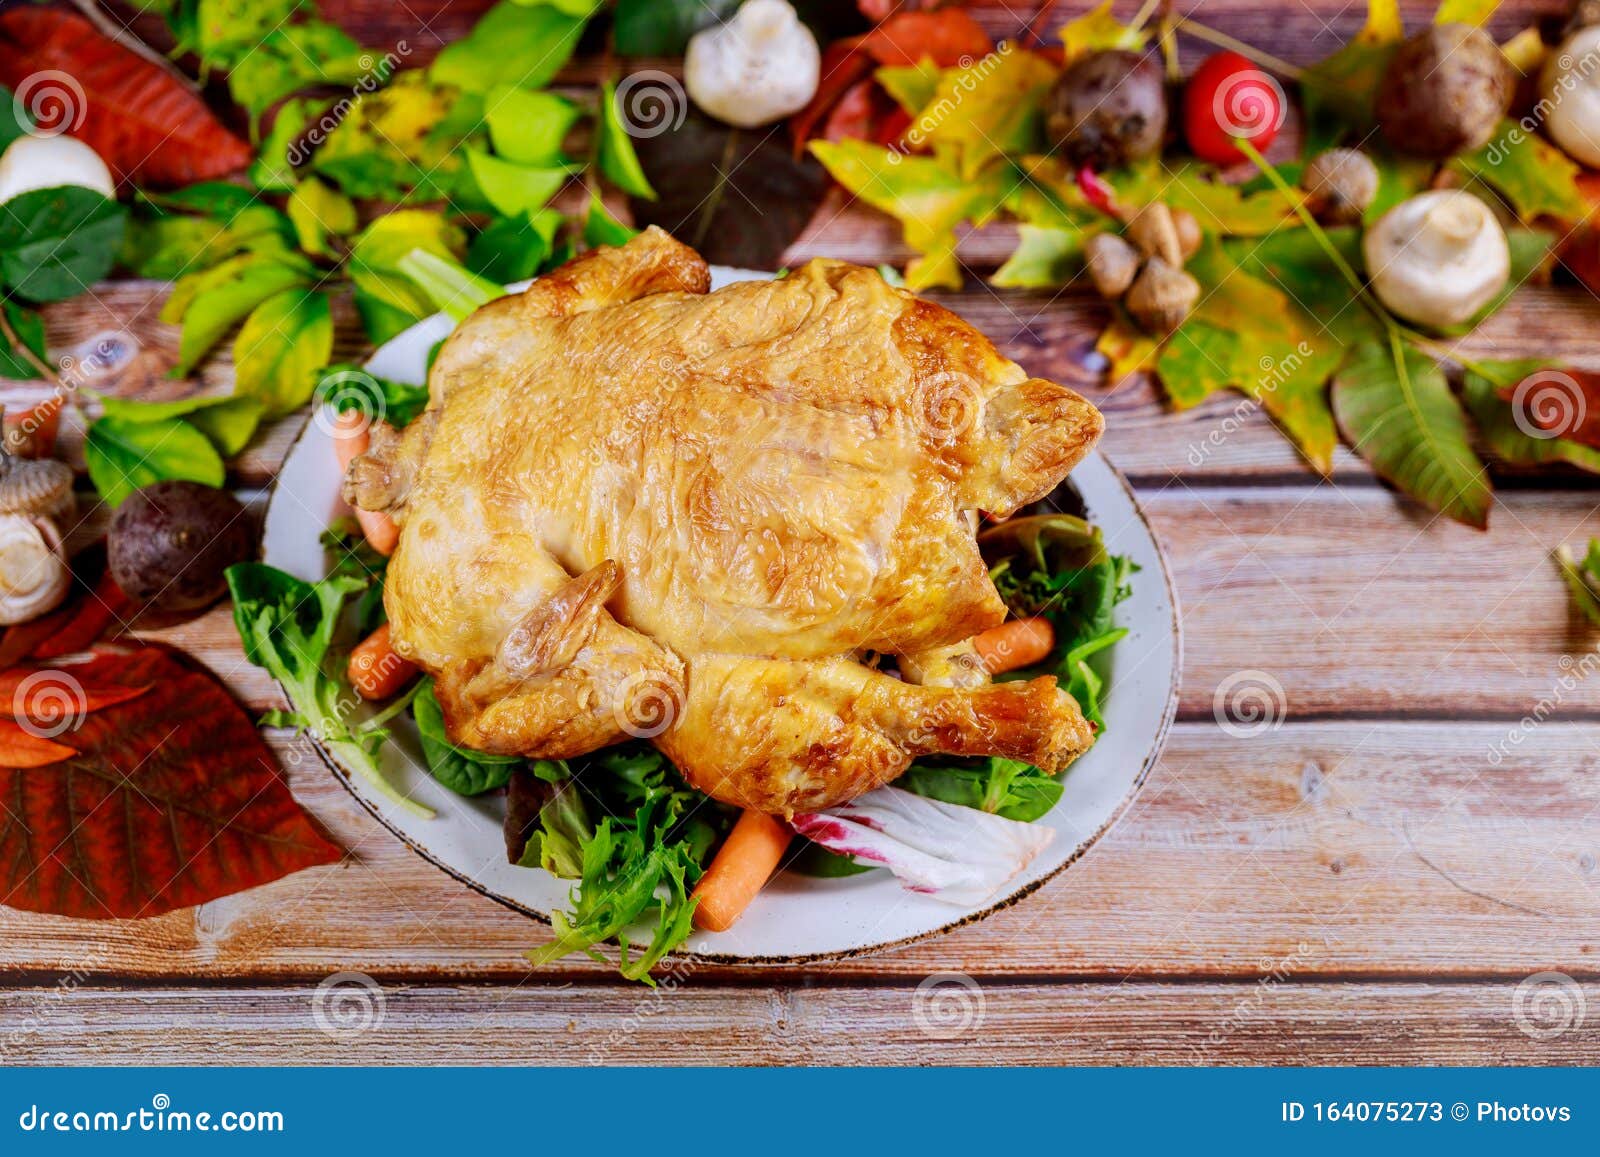 Plate with Roasted Turkey on Thanksgiving Day Stock Image - Image of ...